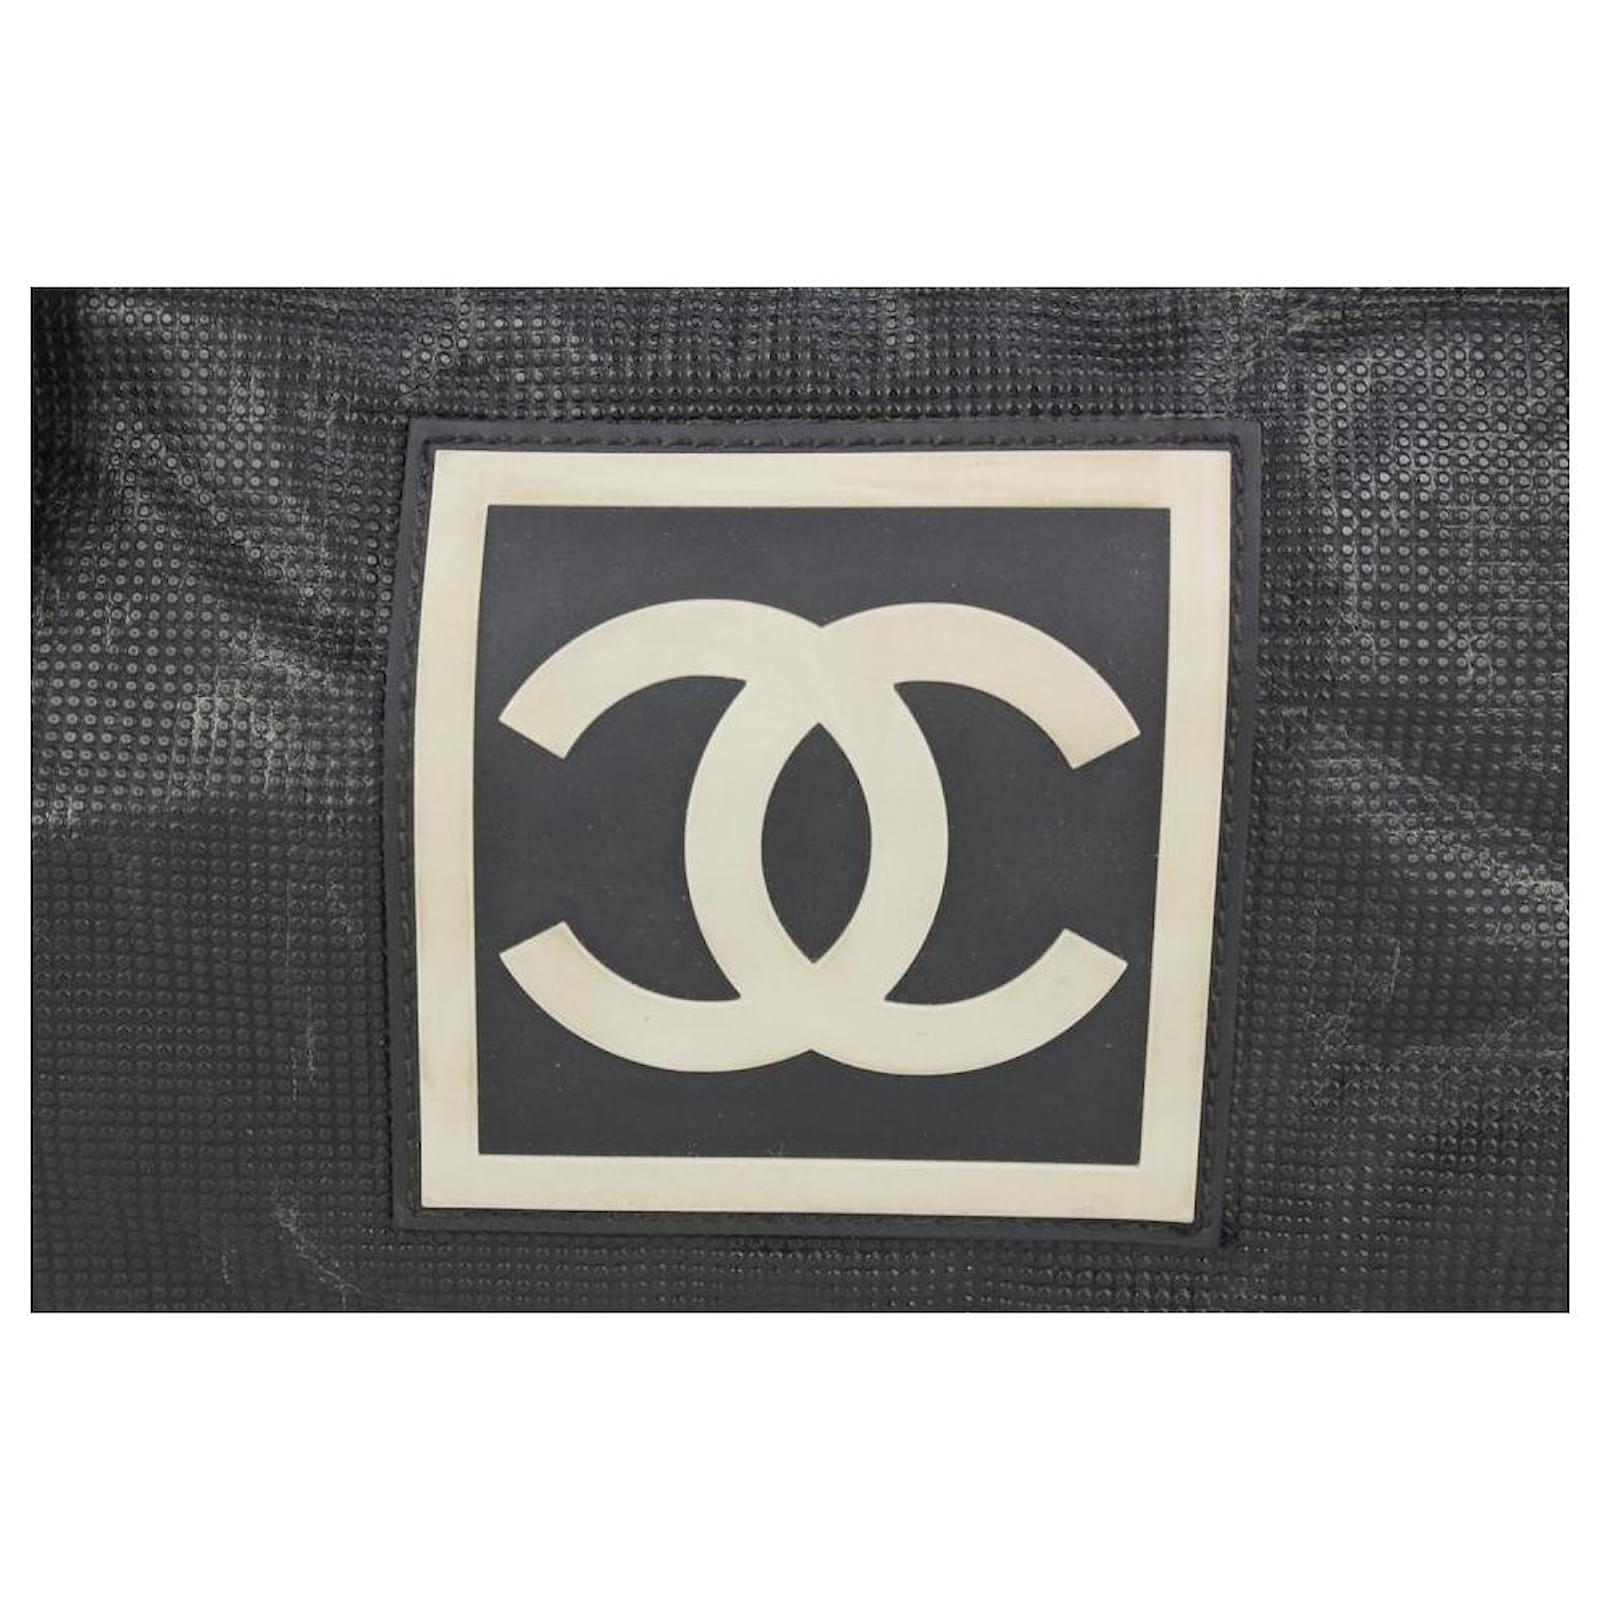 100+ affordable chanel vip gift bag For Sale